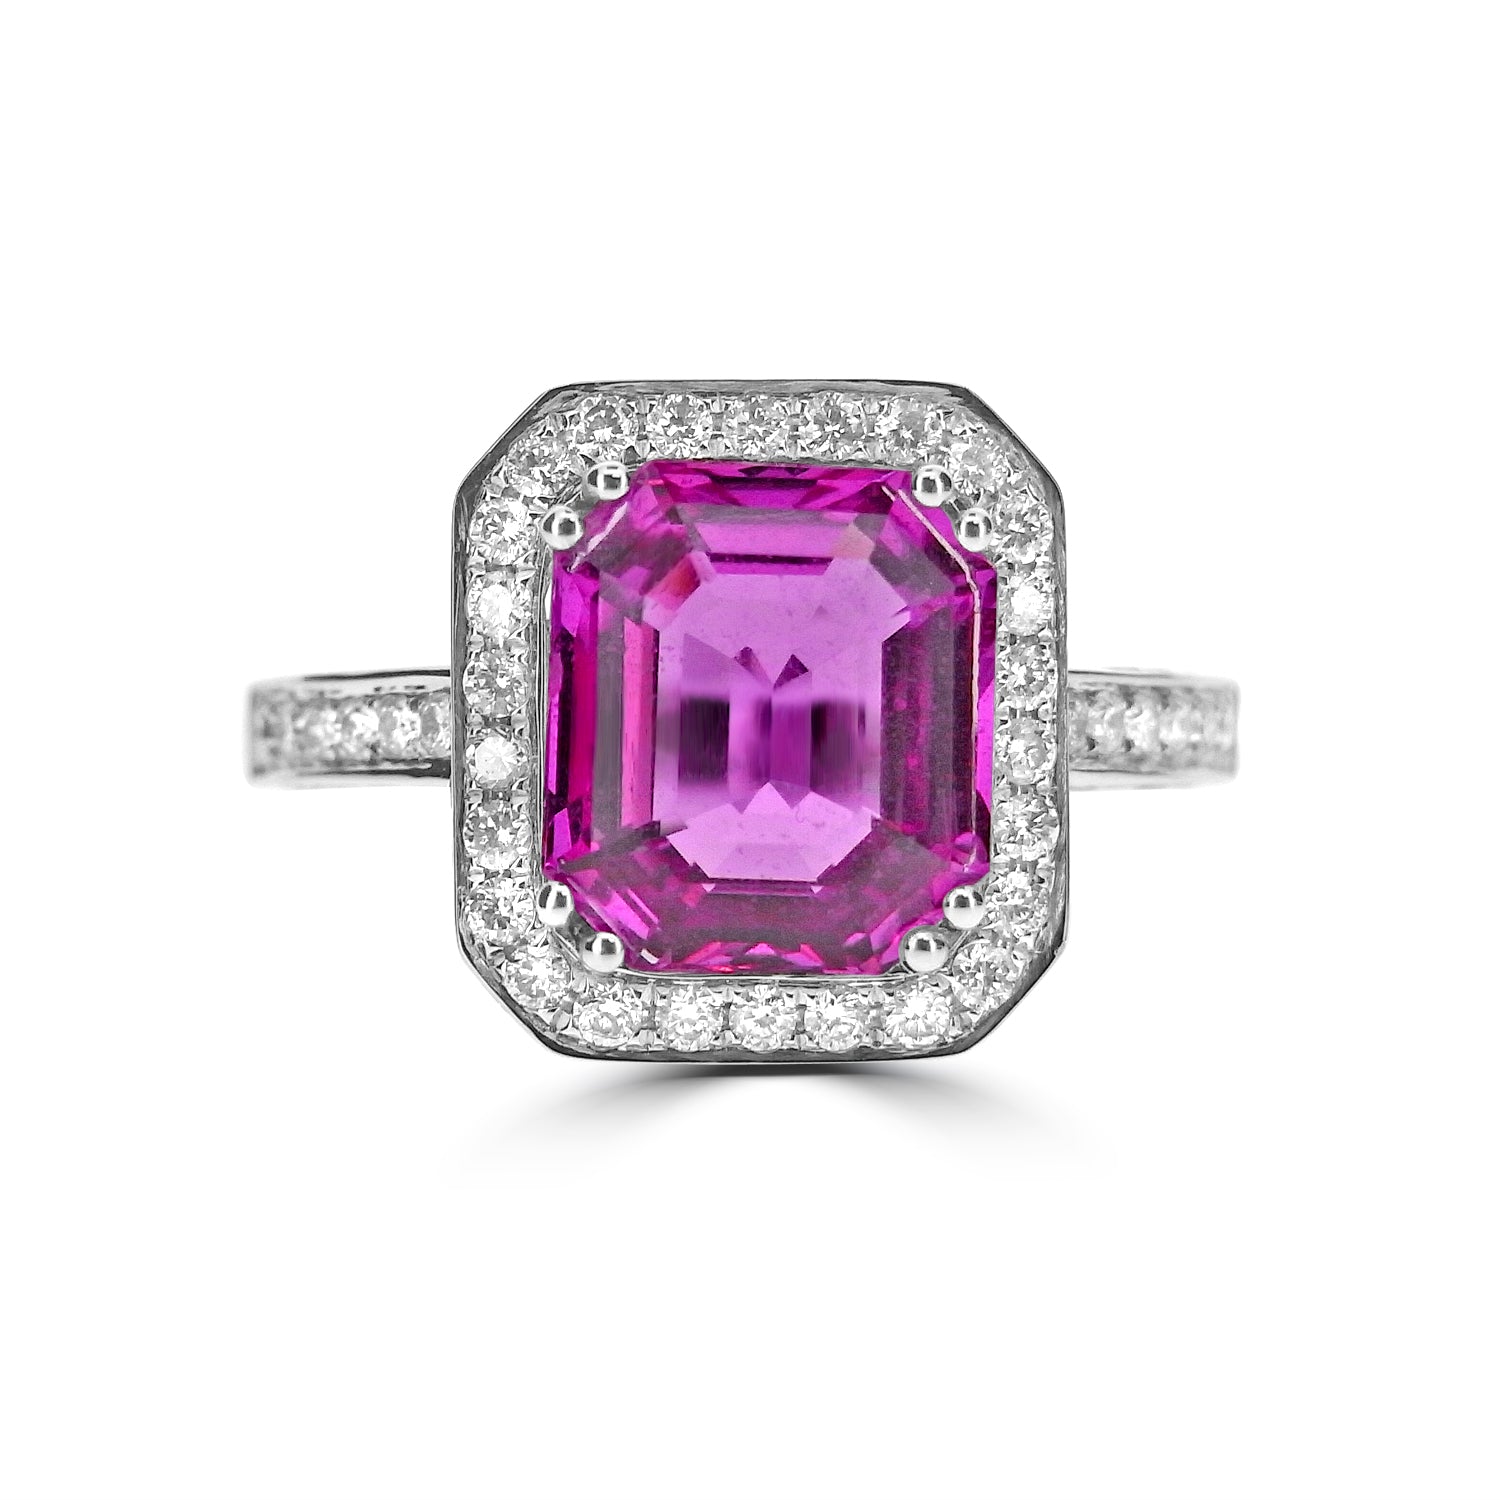 PINK SAPPHIRE ENGAGEMENT RING